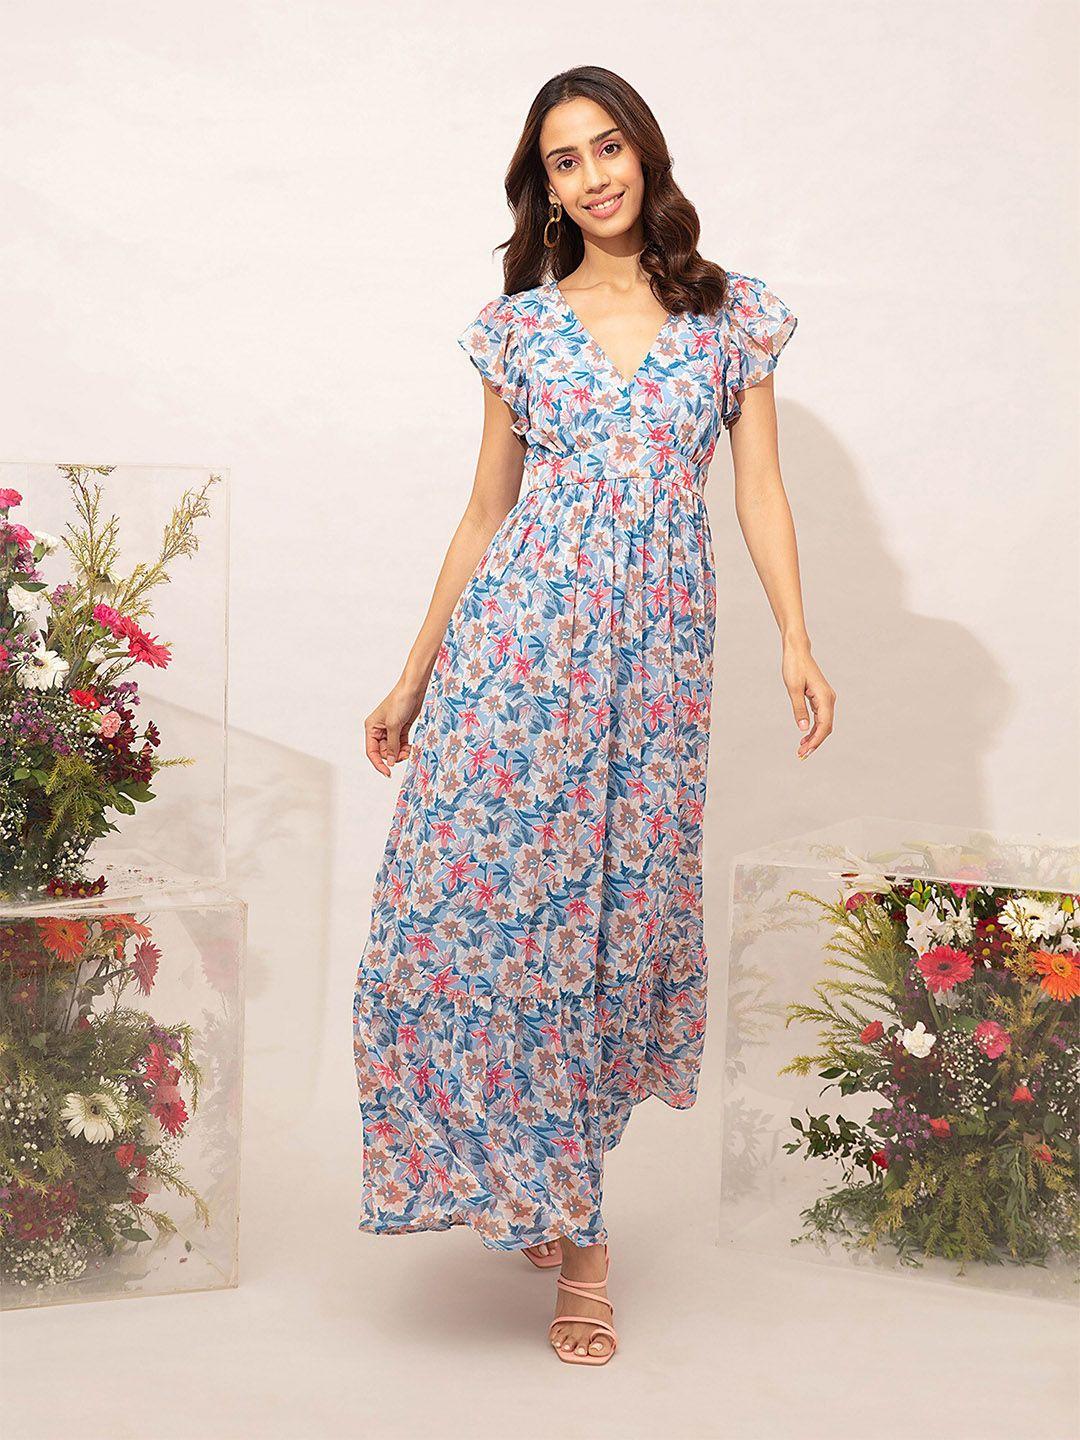 20dresses blue & white printed flared sleeves floral chiffon maxi dress